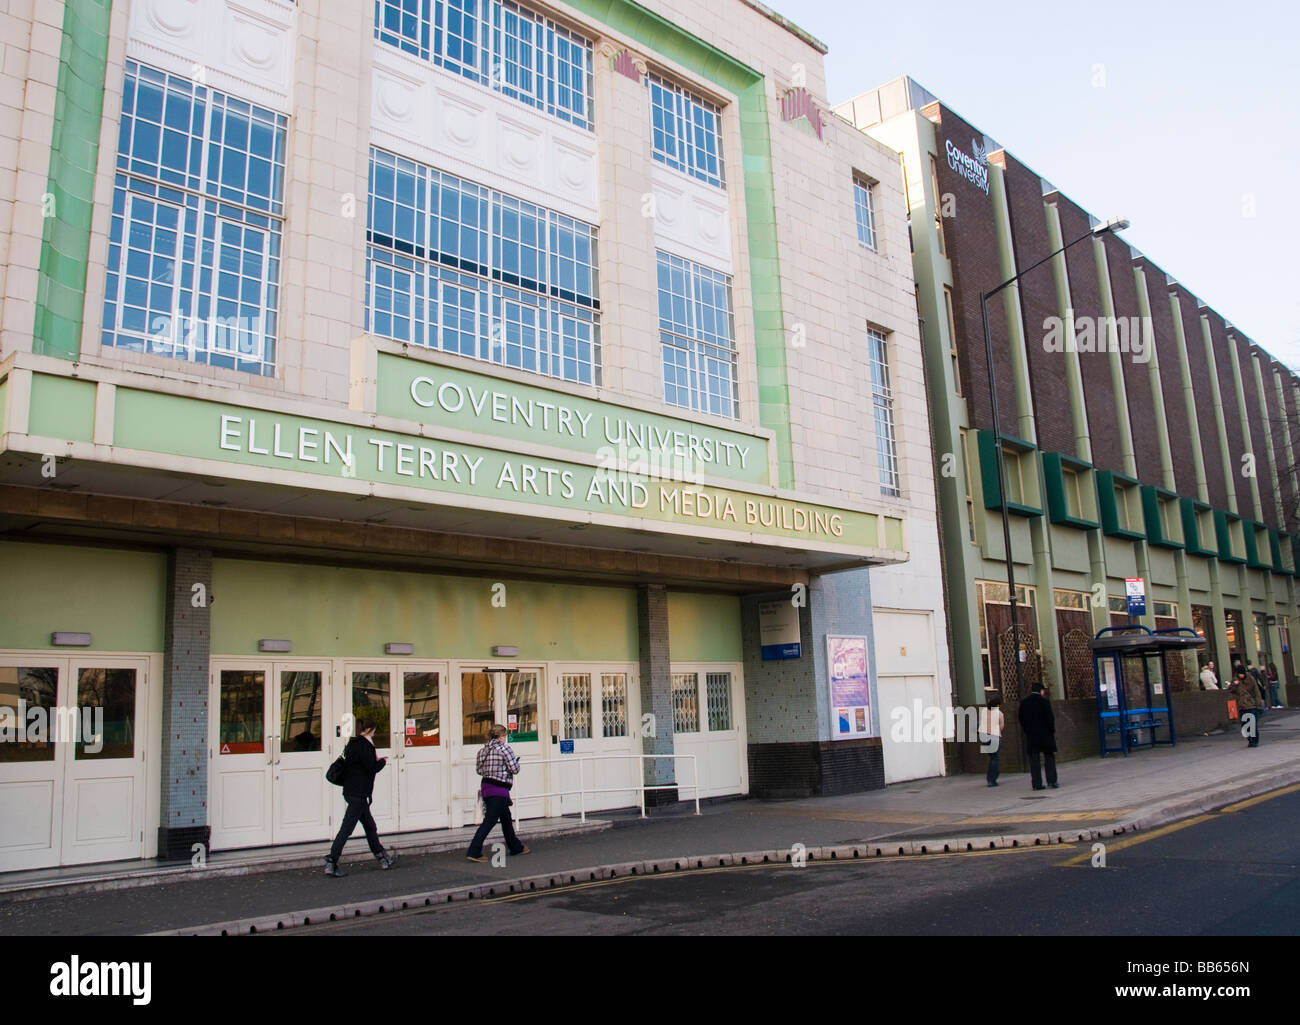 Ellen Terry Arts and Media Building in Coventry University in Britain Stock Photo